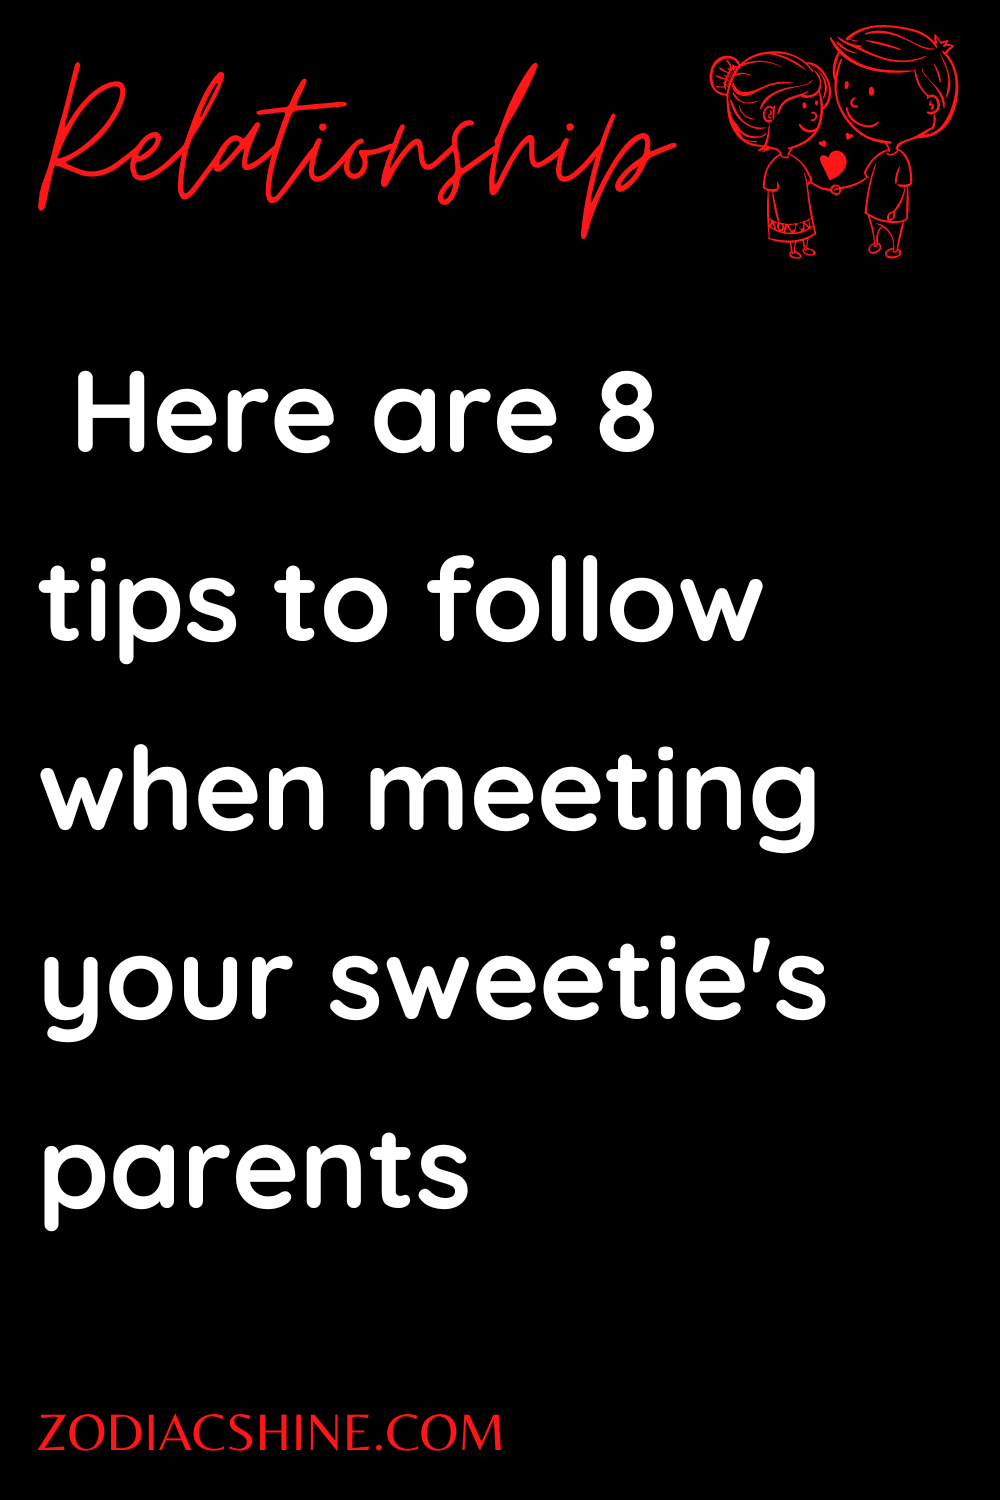  Here are 8 tips to follow when meeting your sweetie's parents